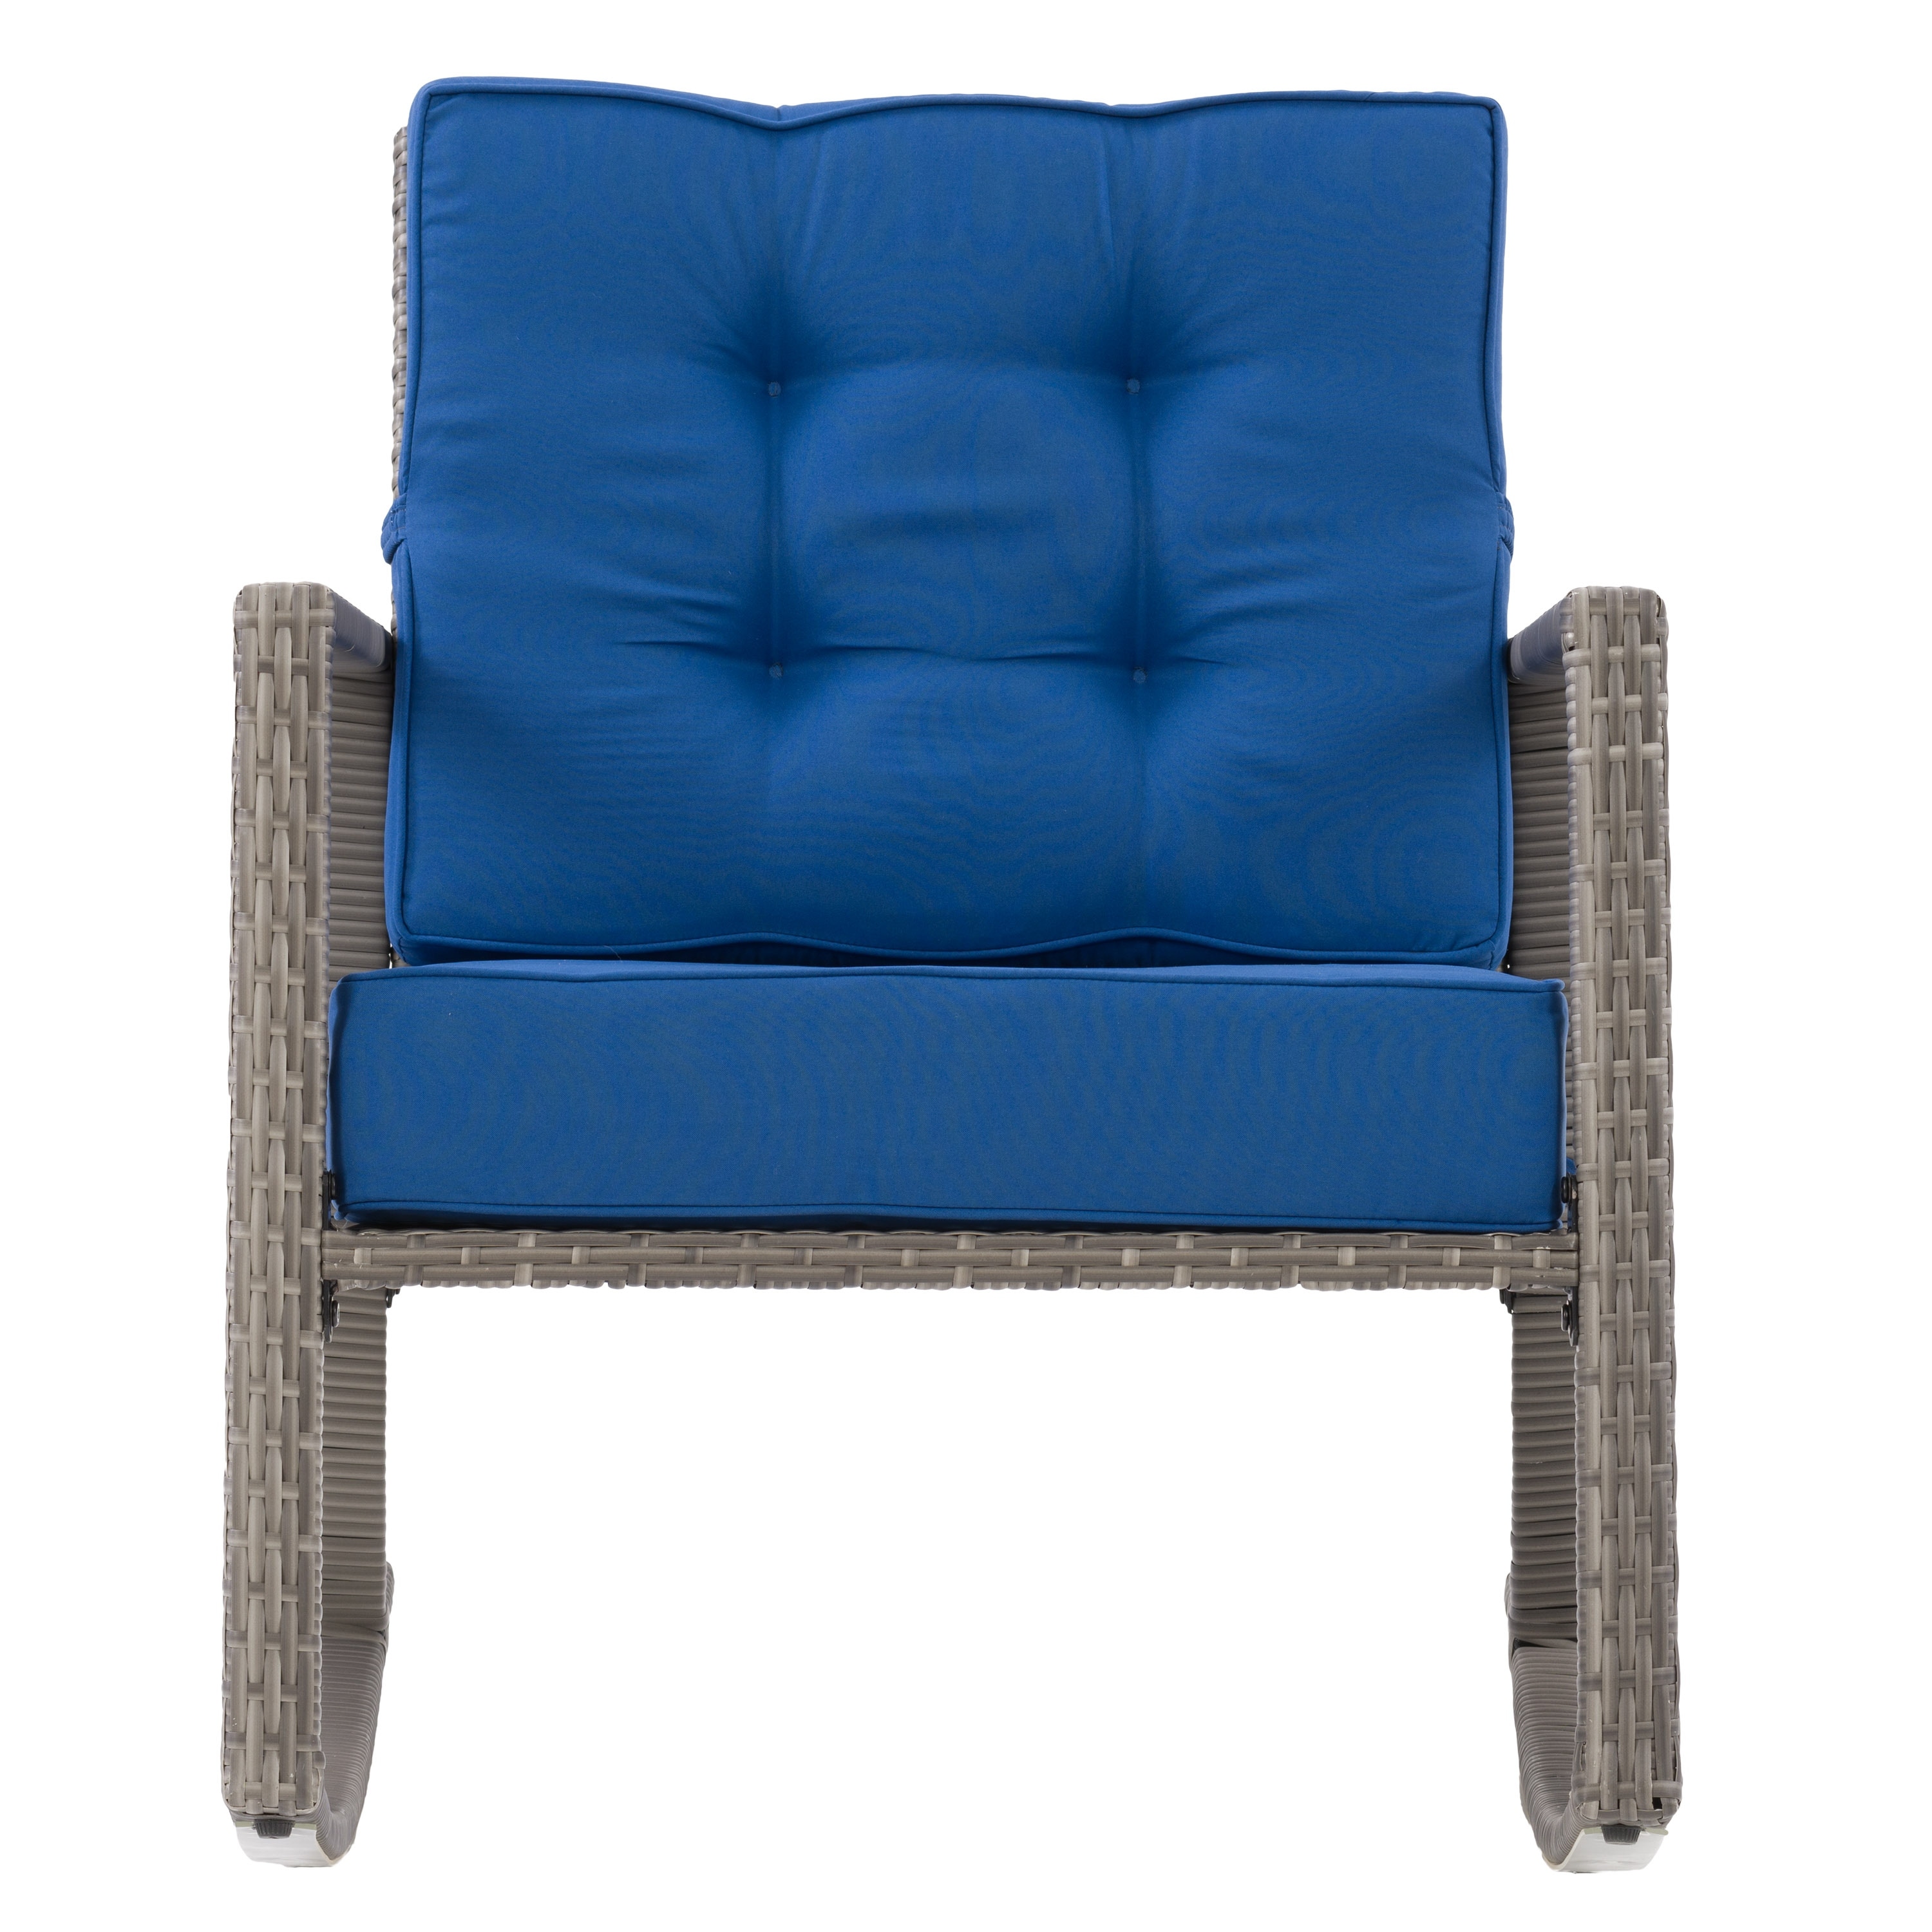 Corliving Blue Parksville Patio Rocking Chair